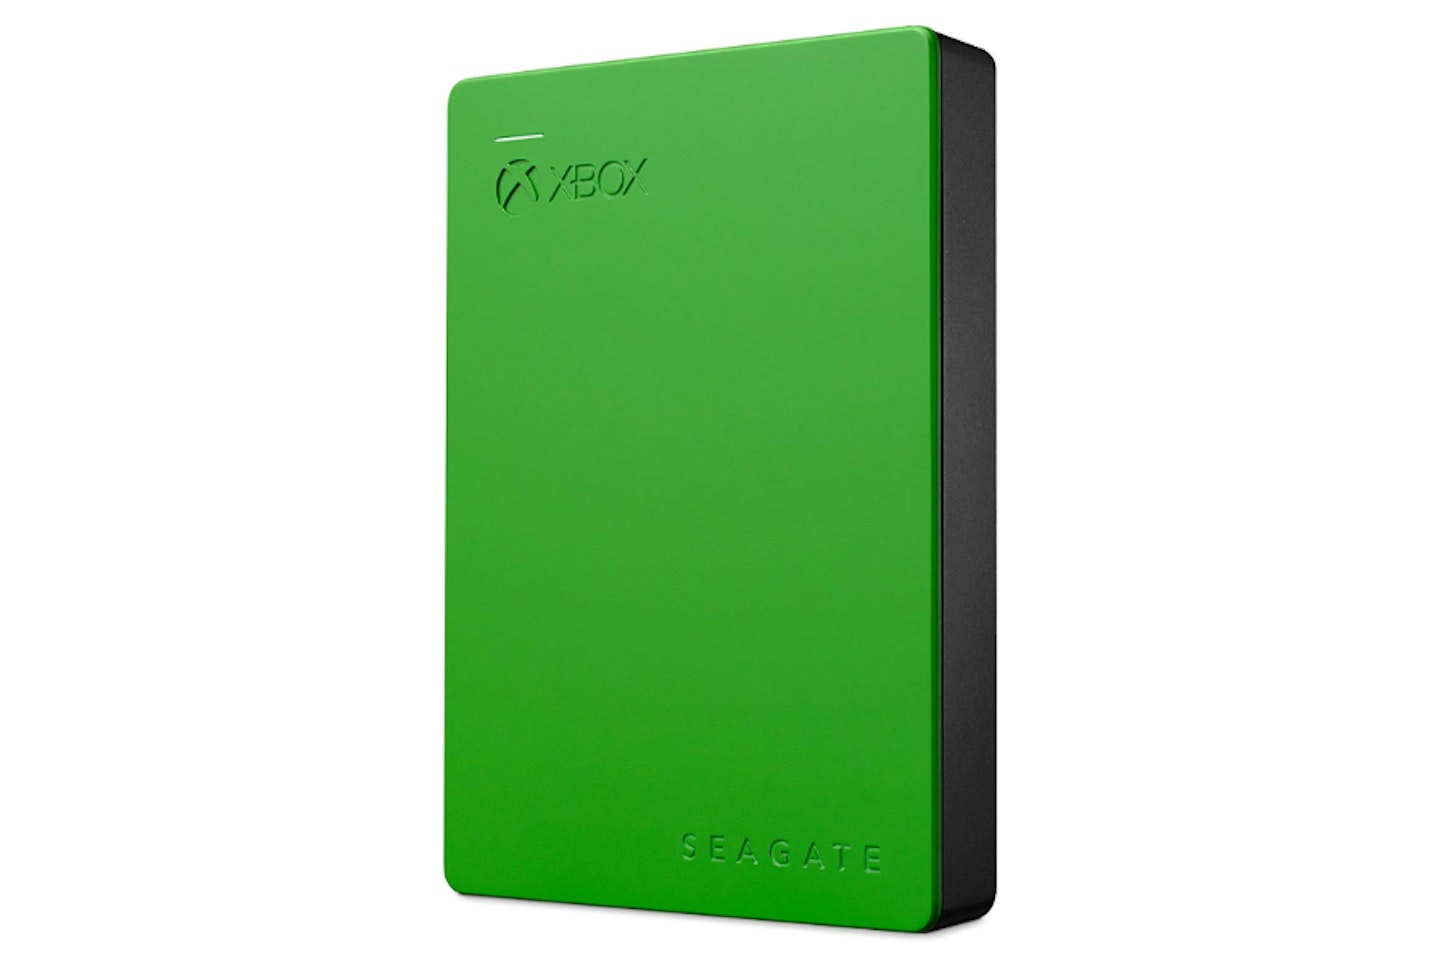 Seagate 2 TB Game Drive External Hard Drive for Xbox One